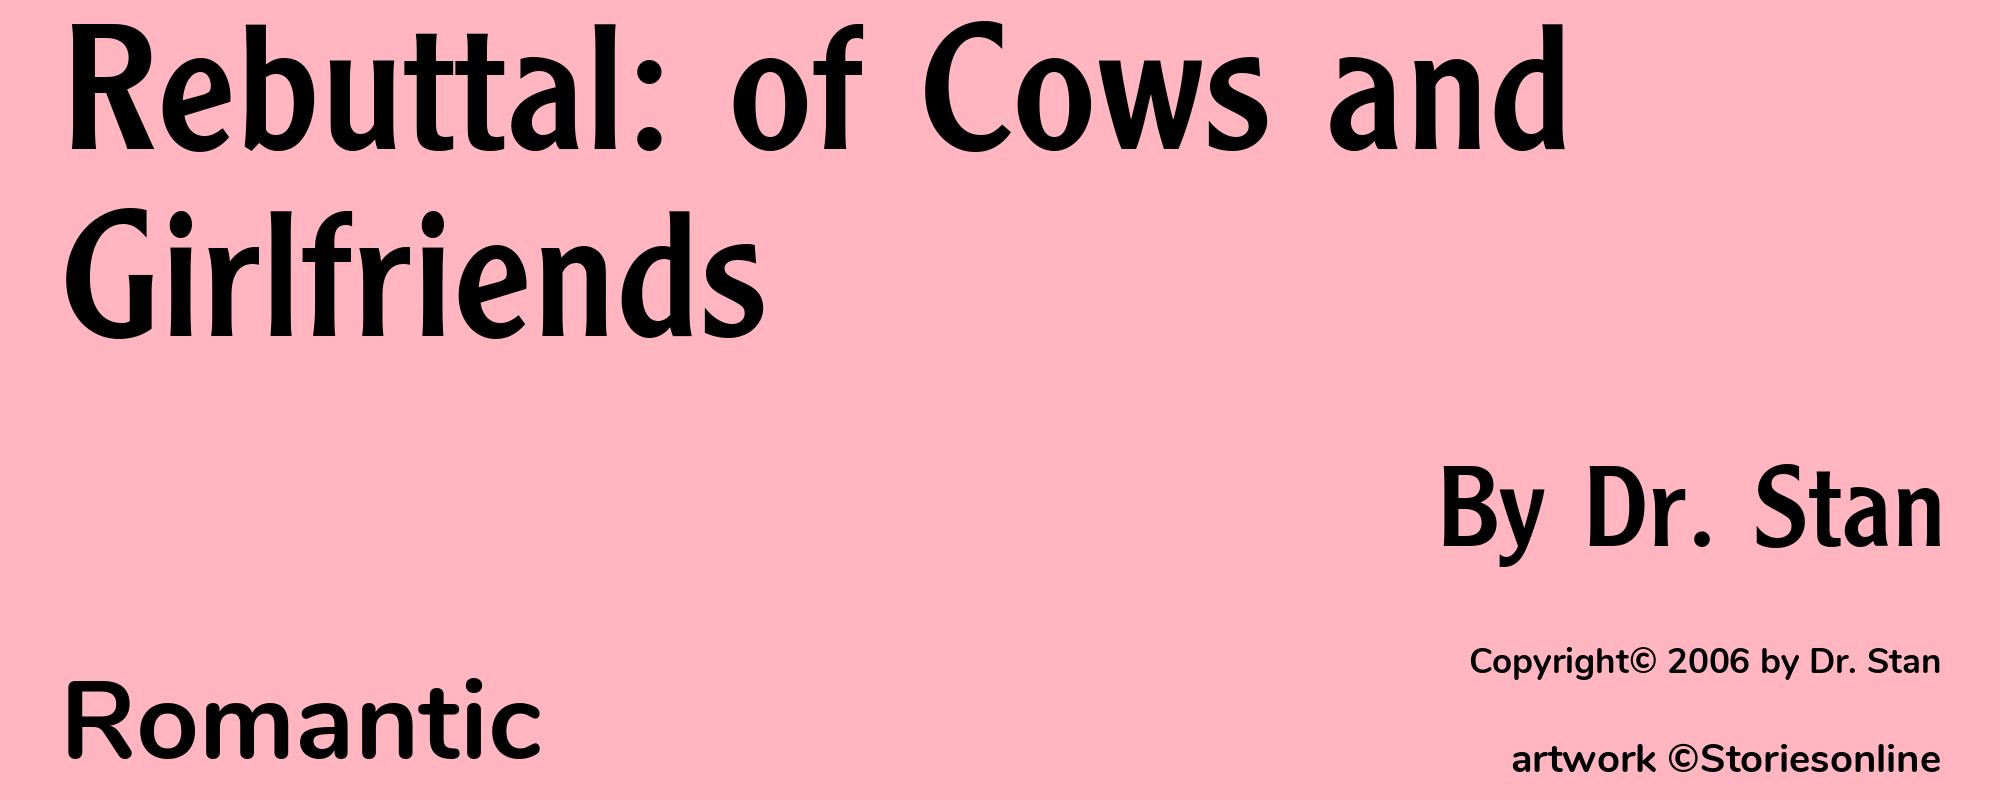 Rebuttal: of Cows and Girlfriends - Cover